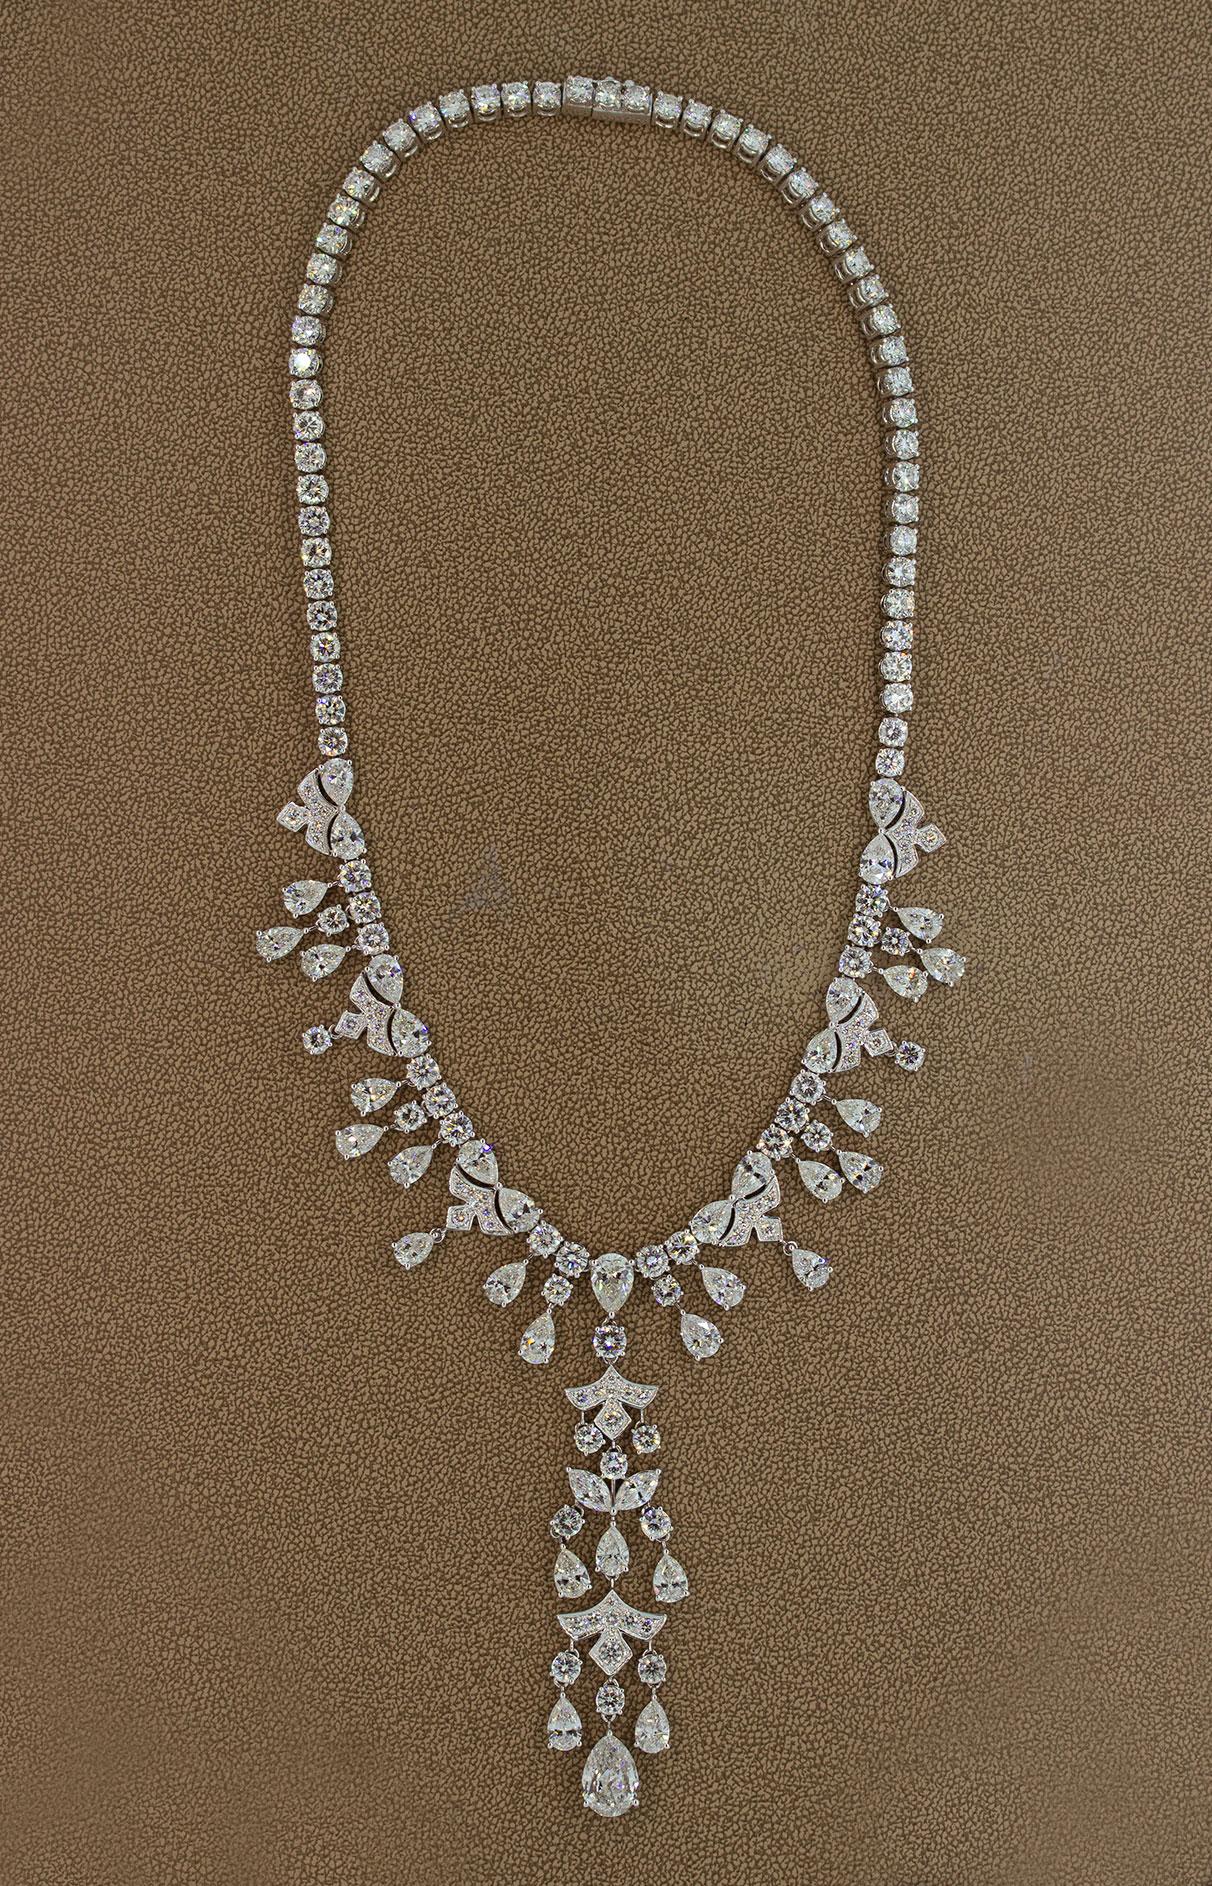 The ultimate diamond evening wear necklace. Featuring a total of 59.44 carats of diamonds this necklace is ready to grace any ballroom outfit. The largest diamond on the necklace is the pear shaped diamond on the end of the drop which weights 2.77